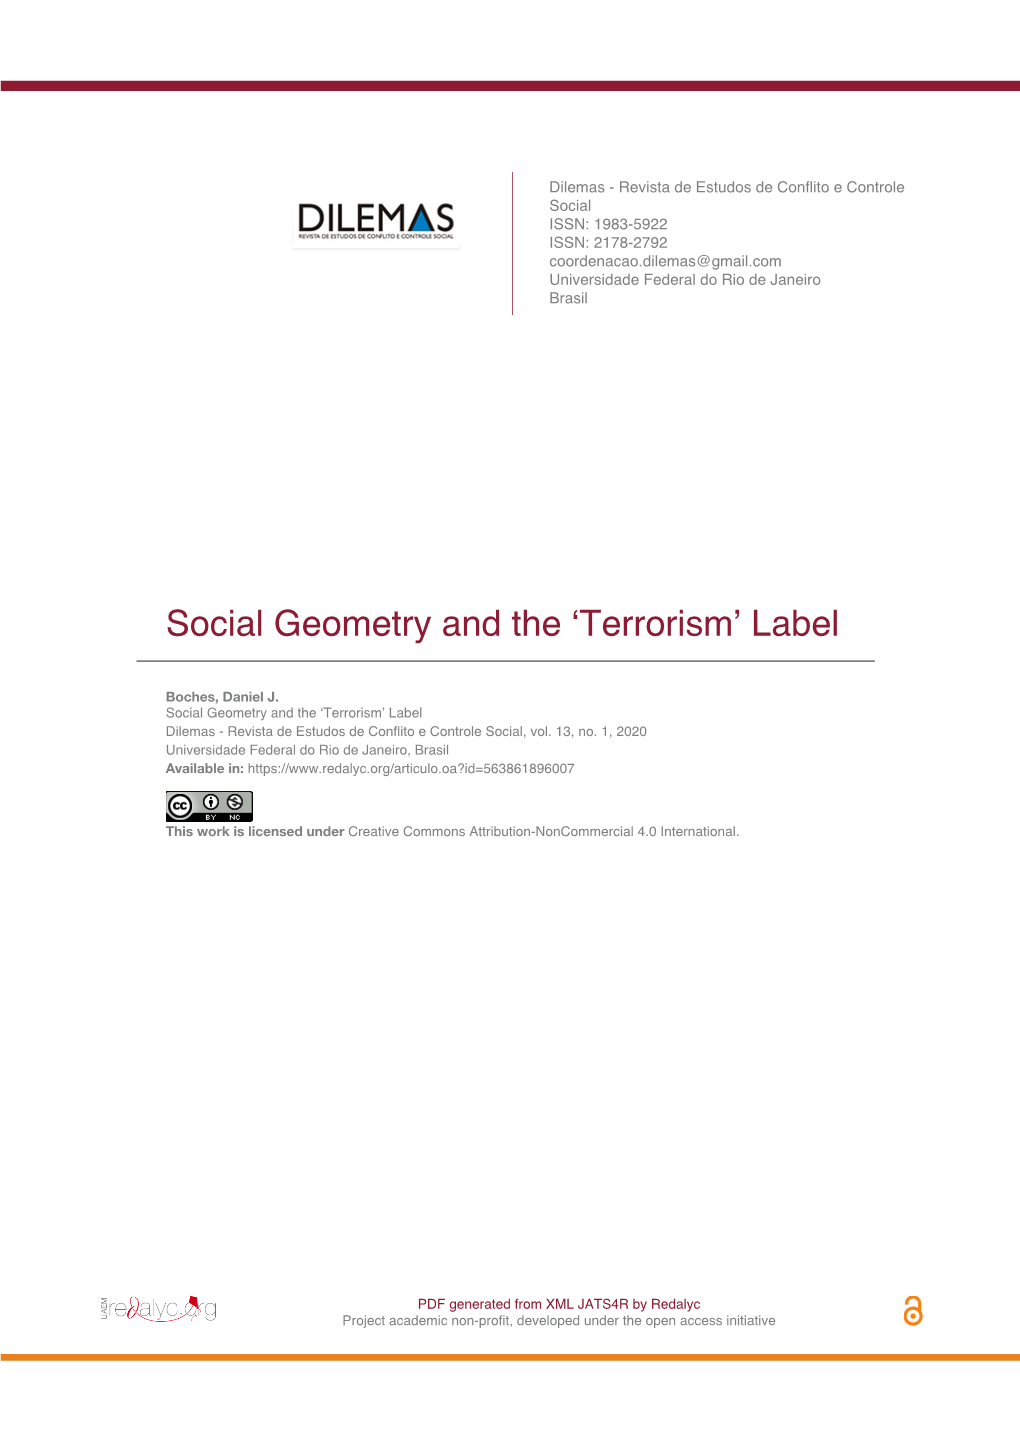 Social Geometry and the 'Terrorism' Label